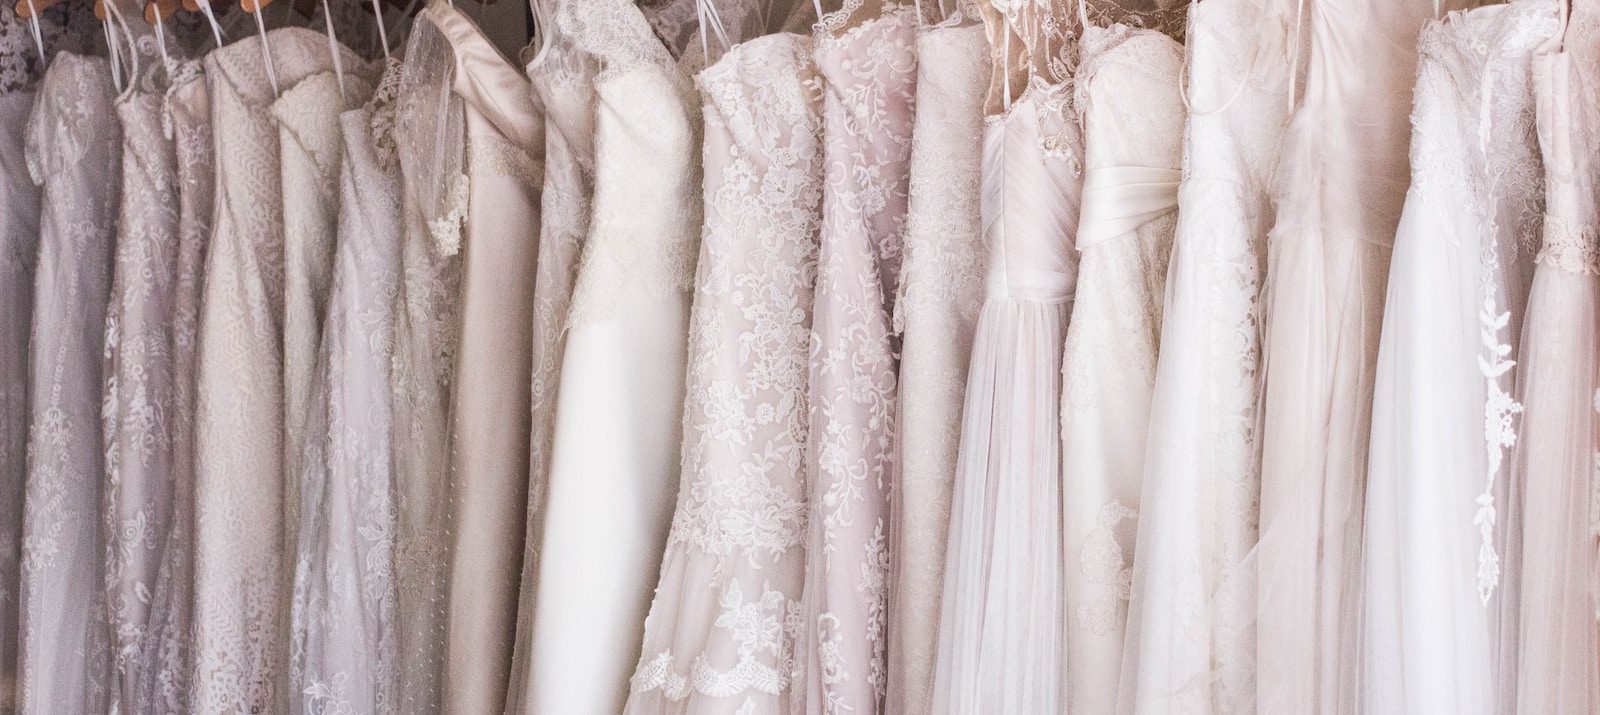 The Ultimate Guide to Cleaning and Storing a Wedding Dress [12 Tips, With Pictures]